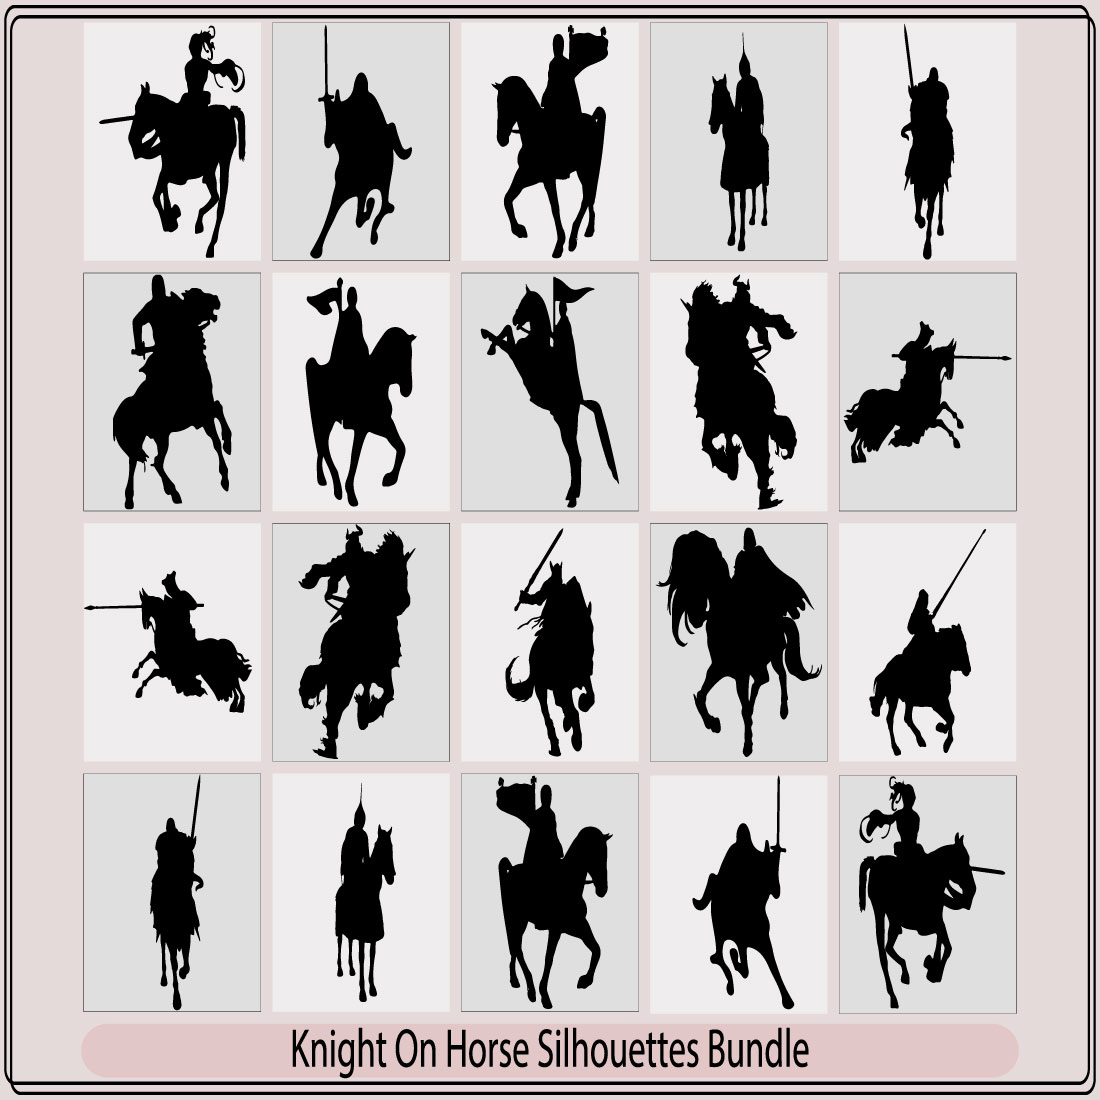 Black silhouette of knight on white background Detailed image of rider with spear and armor,royal knight with sword and shield riding a horse preview image.